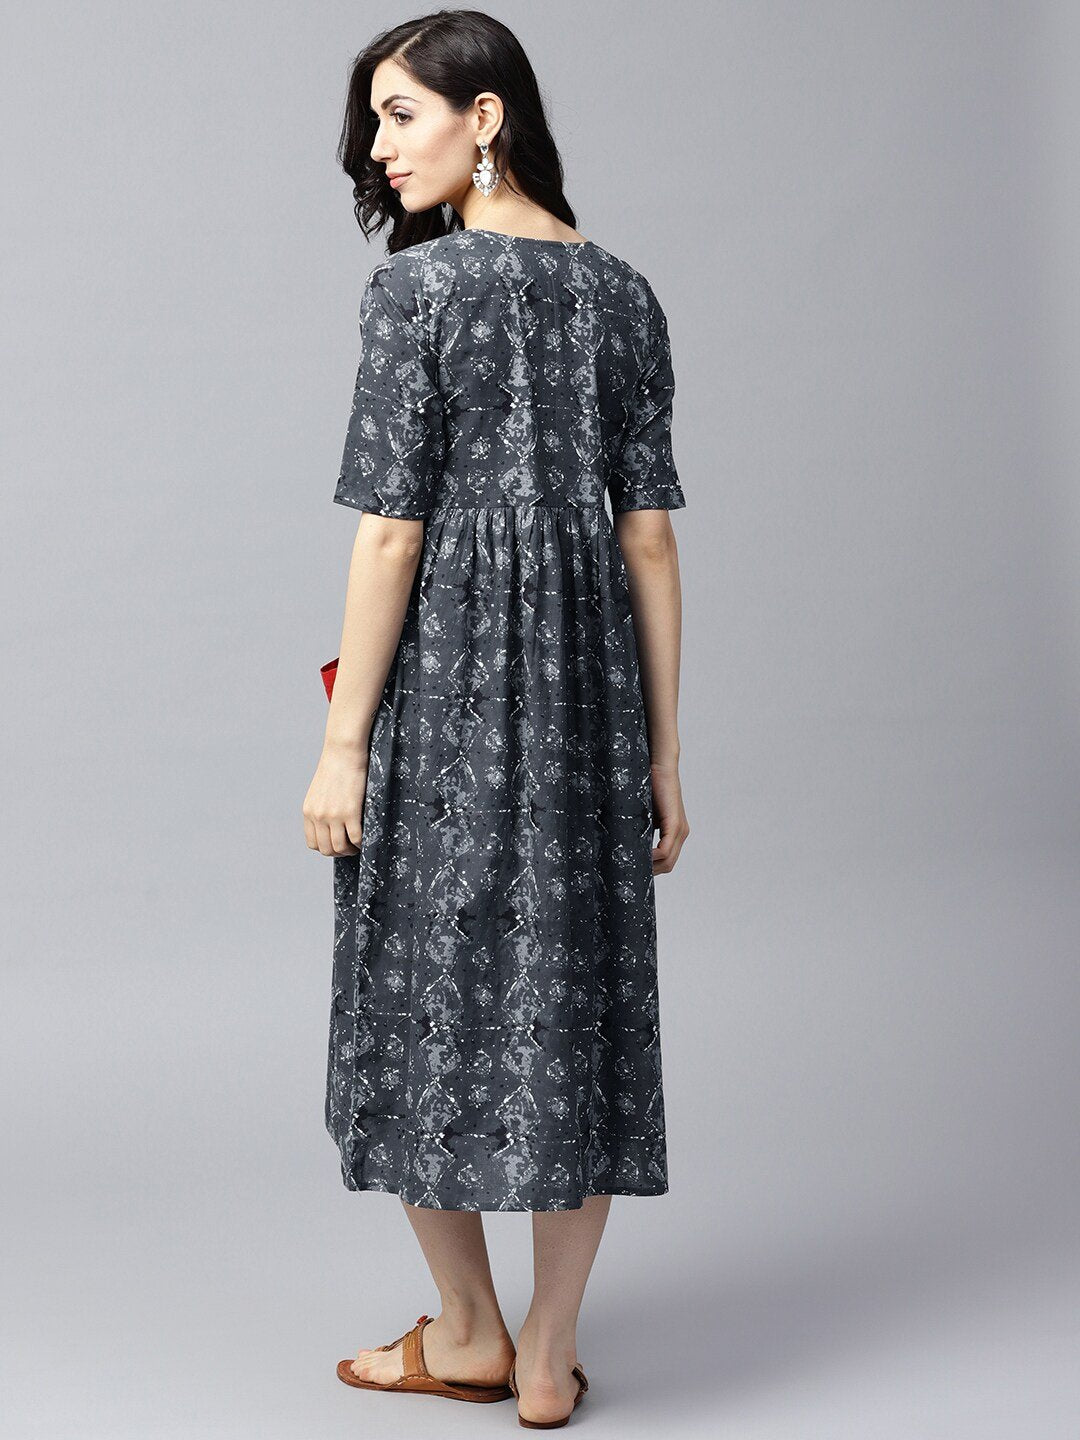 Women's  Grey Printed Fit and Flare Dress - AKS